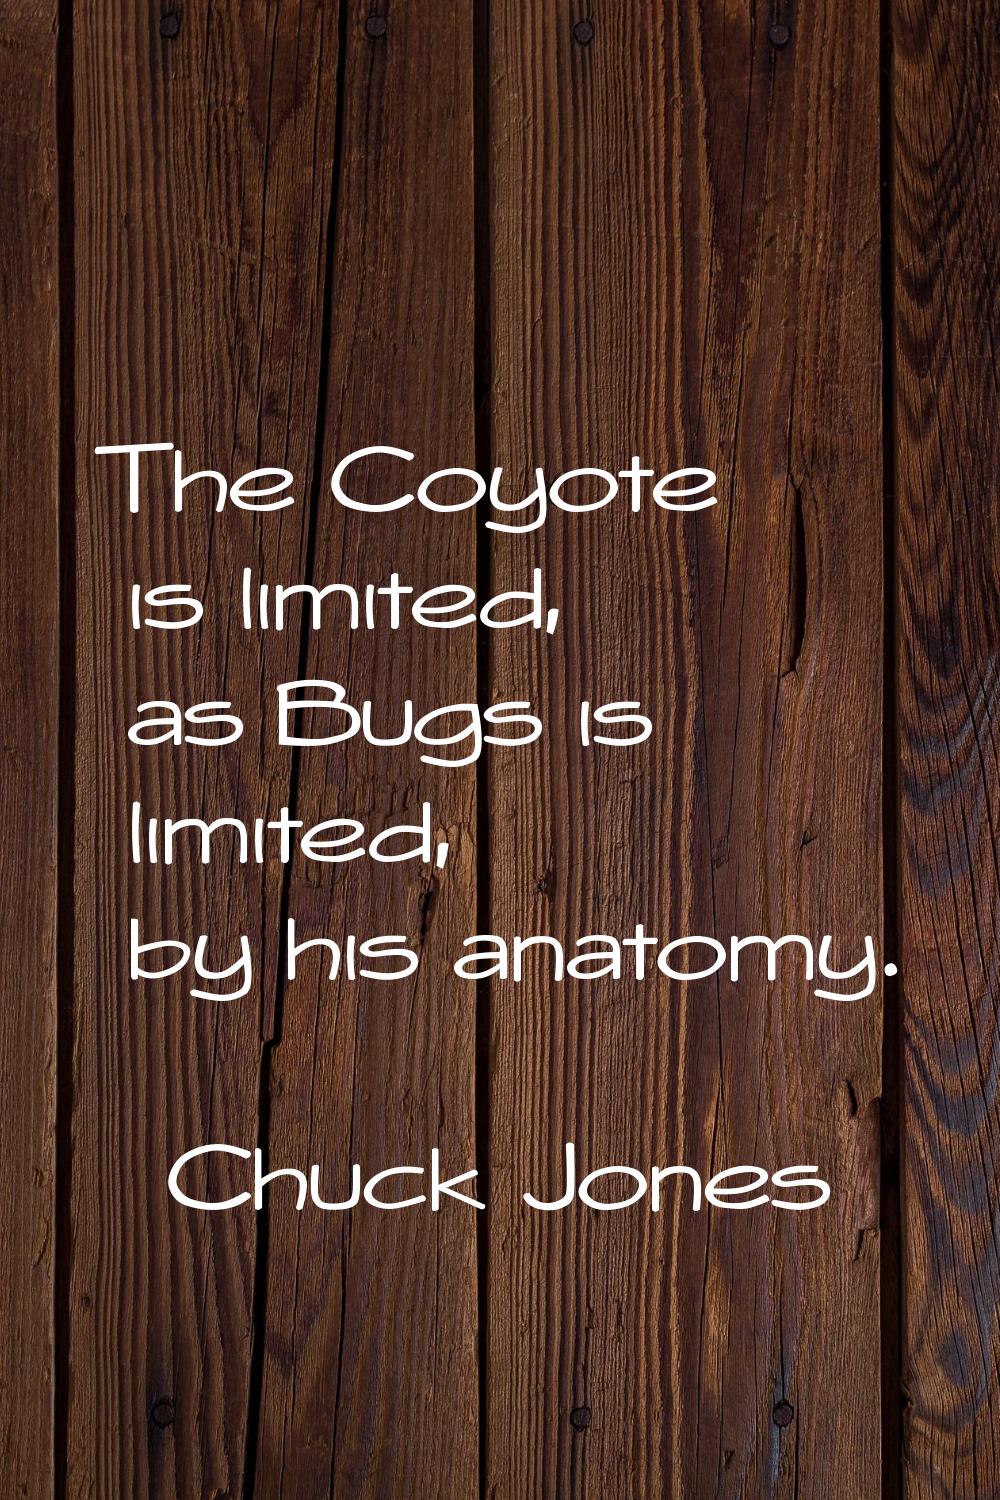 The Coyote is limited, as Bugs is limited, by his anatomy.